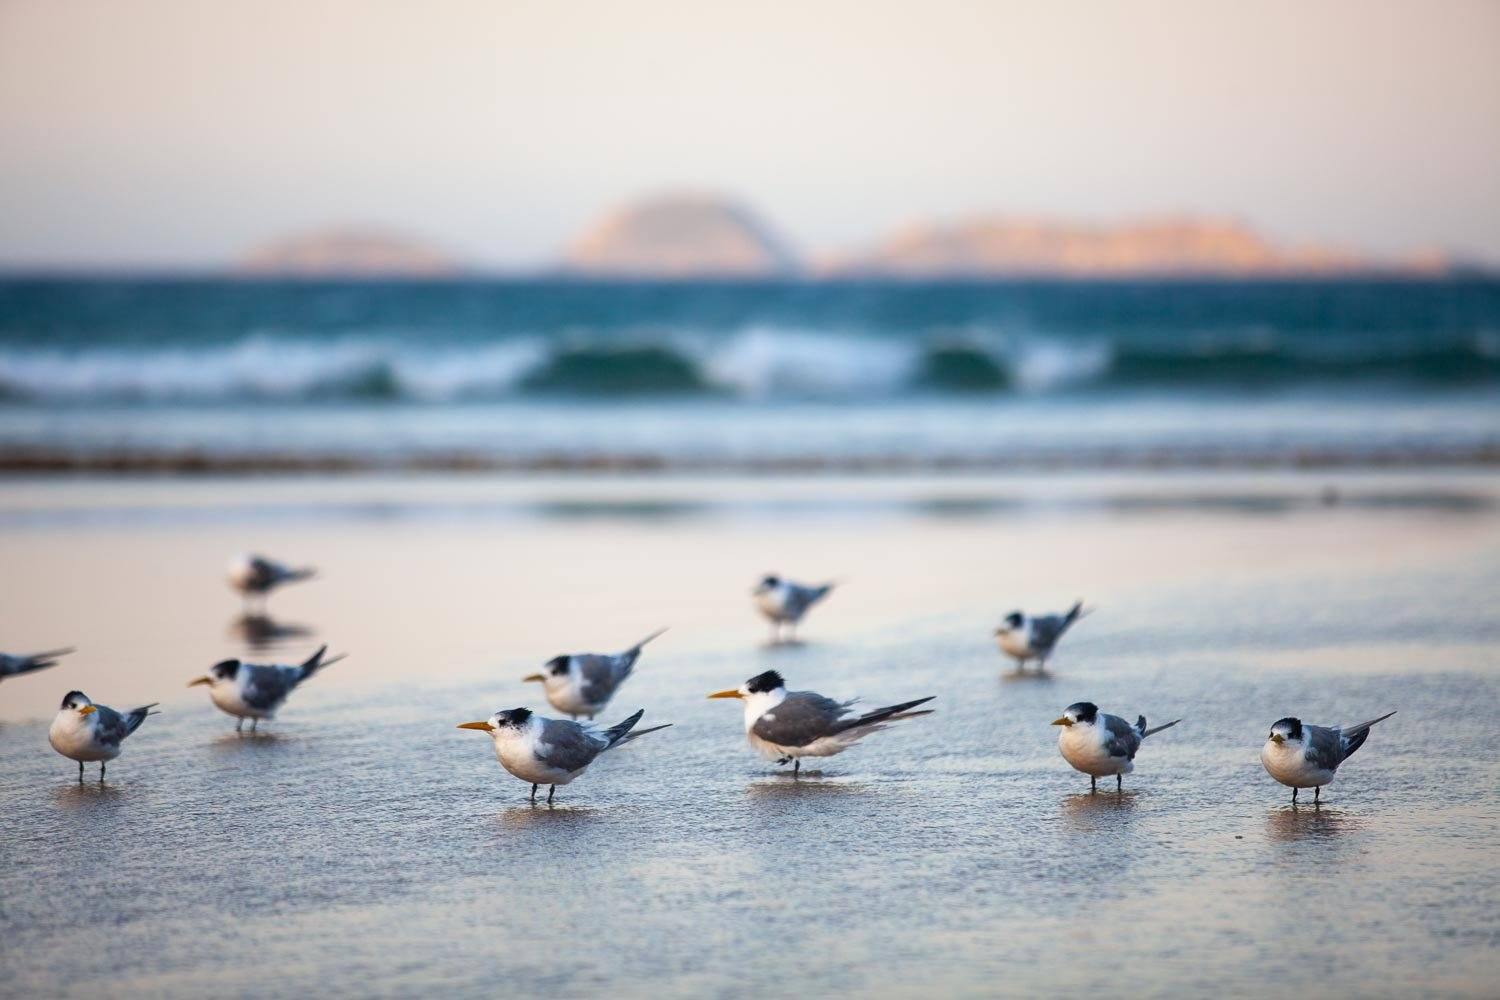 A close up capture of a group of Crested Terns at the seashore with the sea and some blurred rocks in the background, Crested Terns - Wilson's Promontory Victoria 